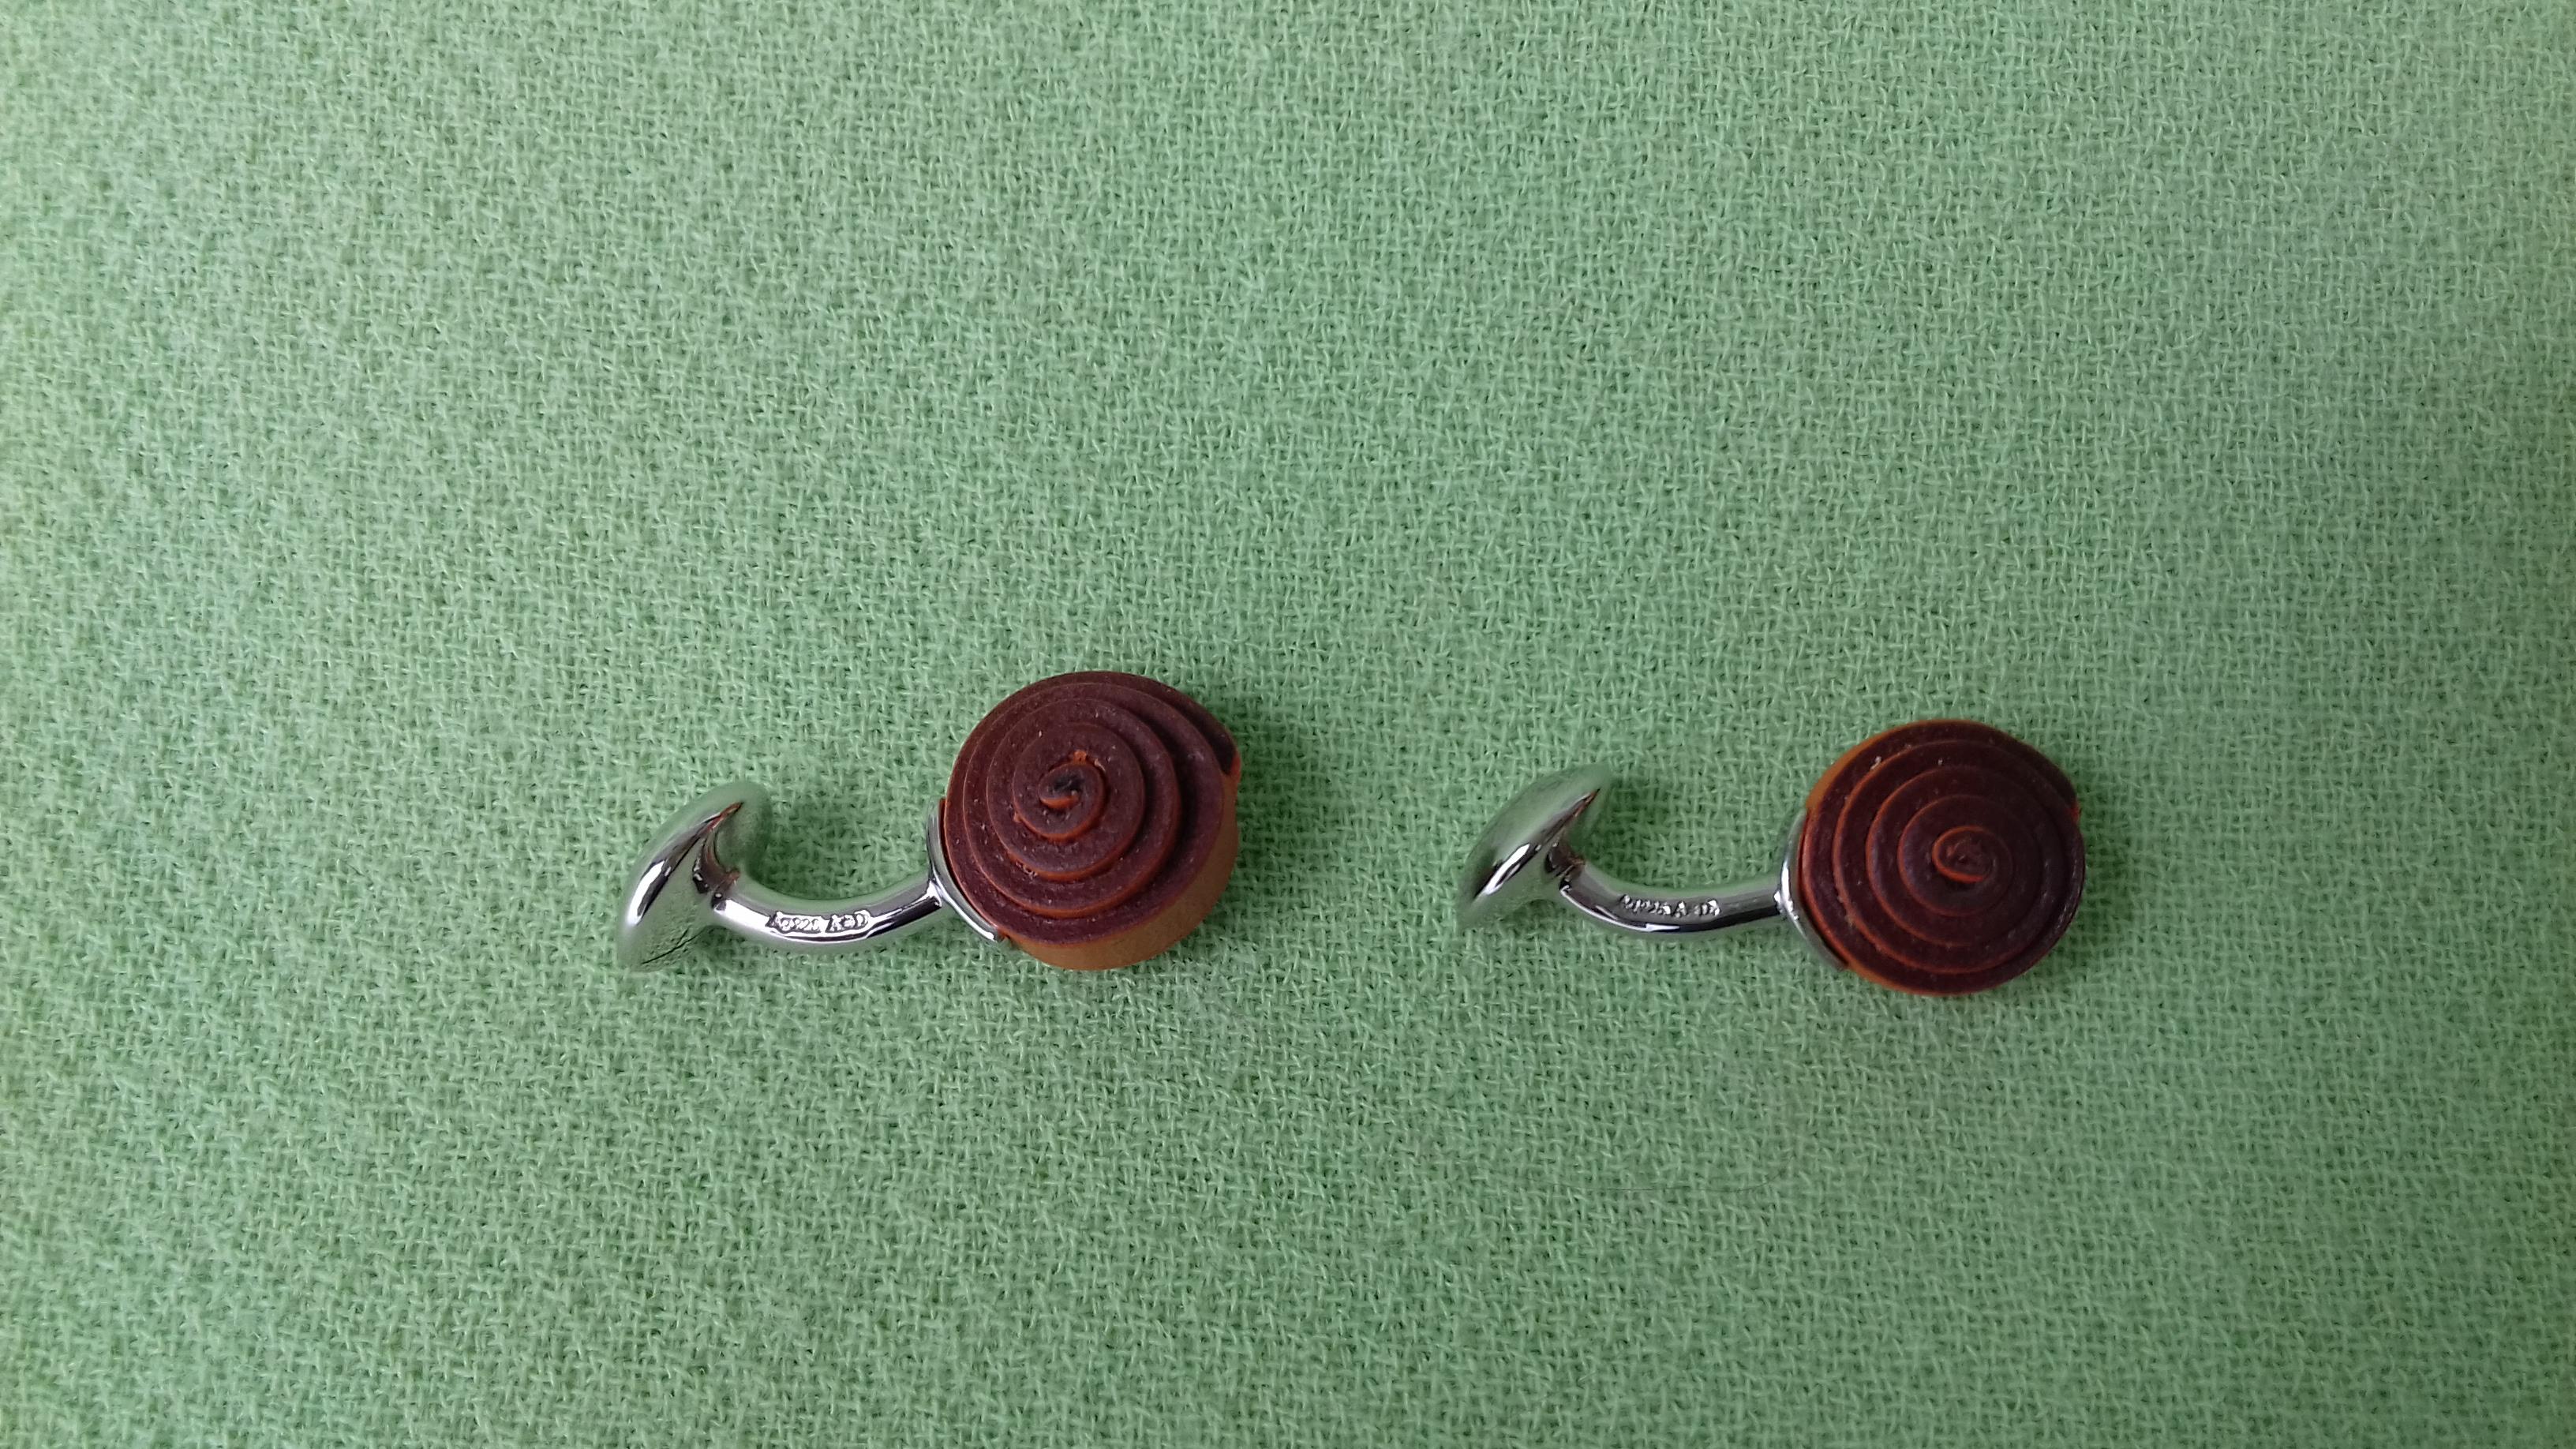 Hermès Coiled Leather and Sterling Silver Cuffs Button Snail Shaped Cufflinks  9